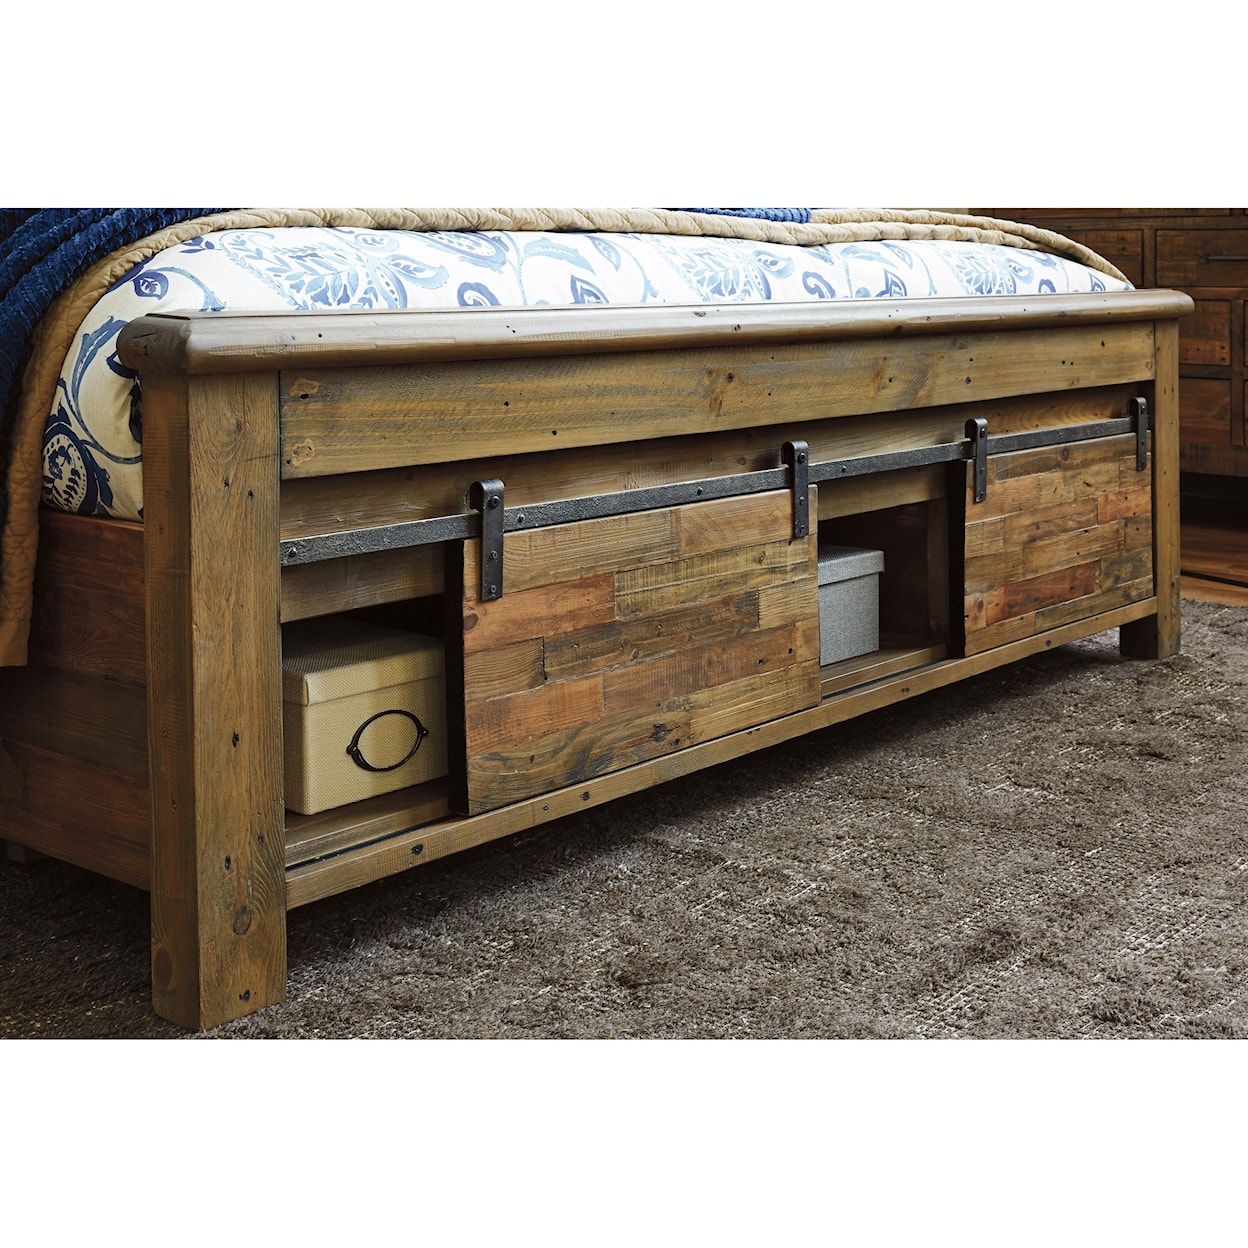 Signature Design by Ashley Sommerford King Panel Storage Bed